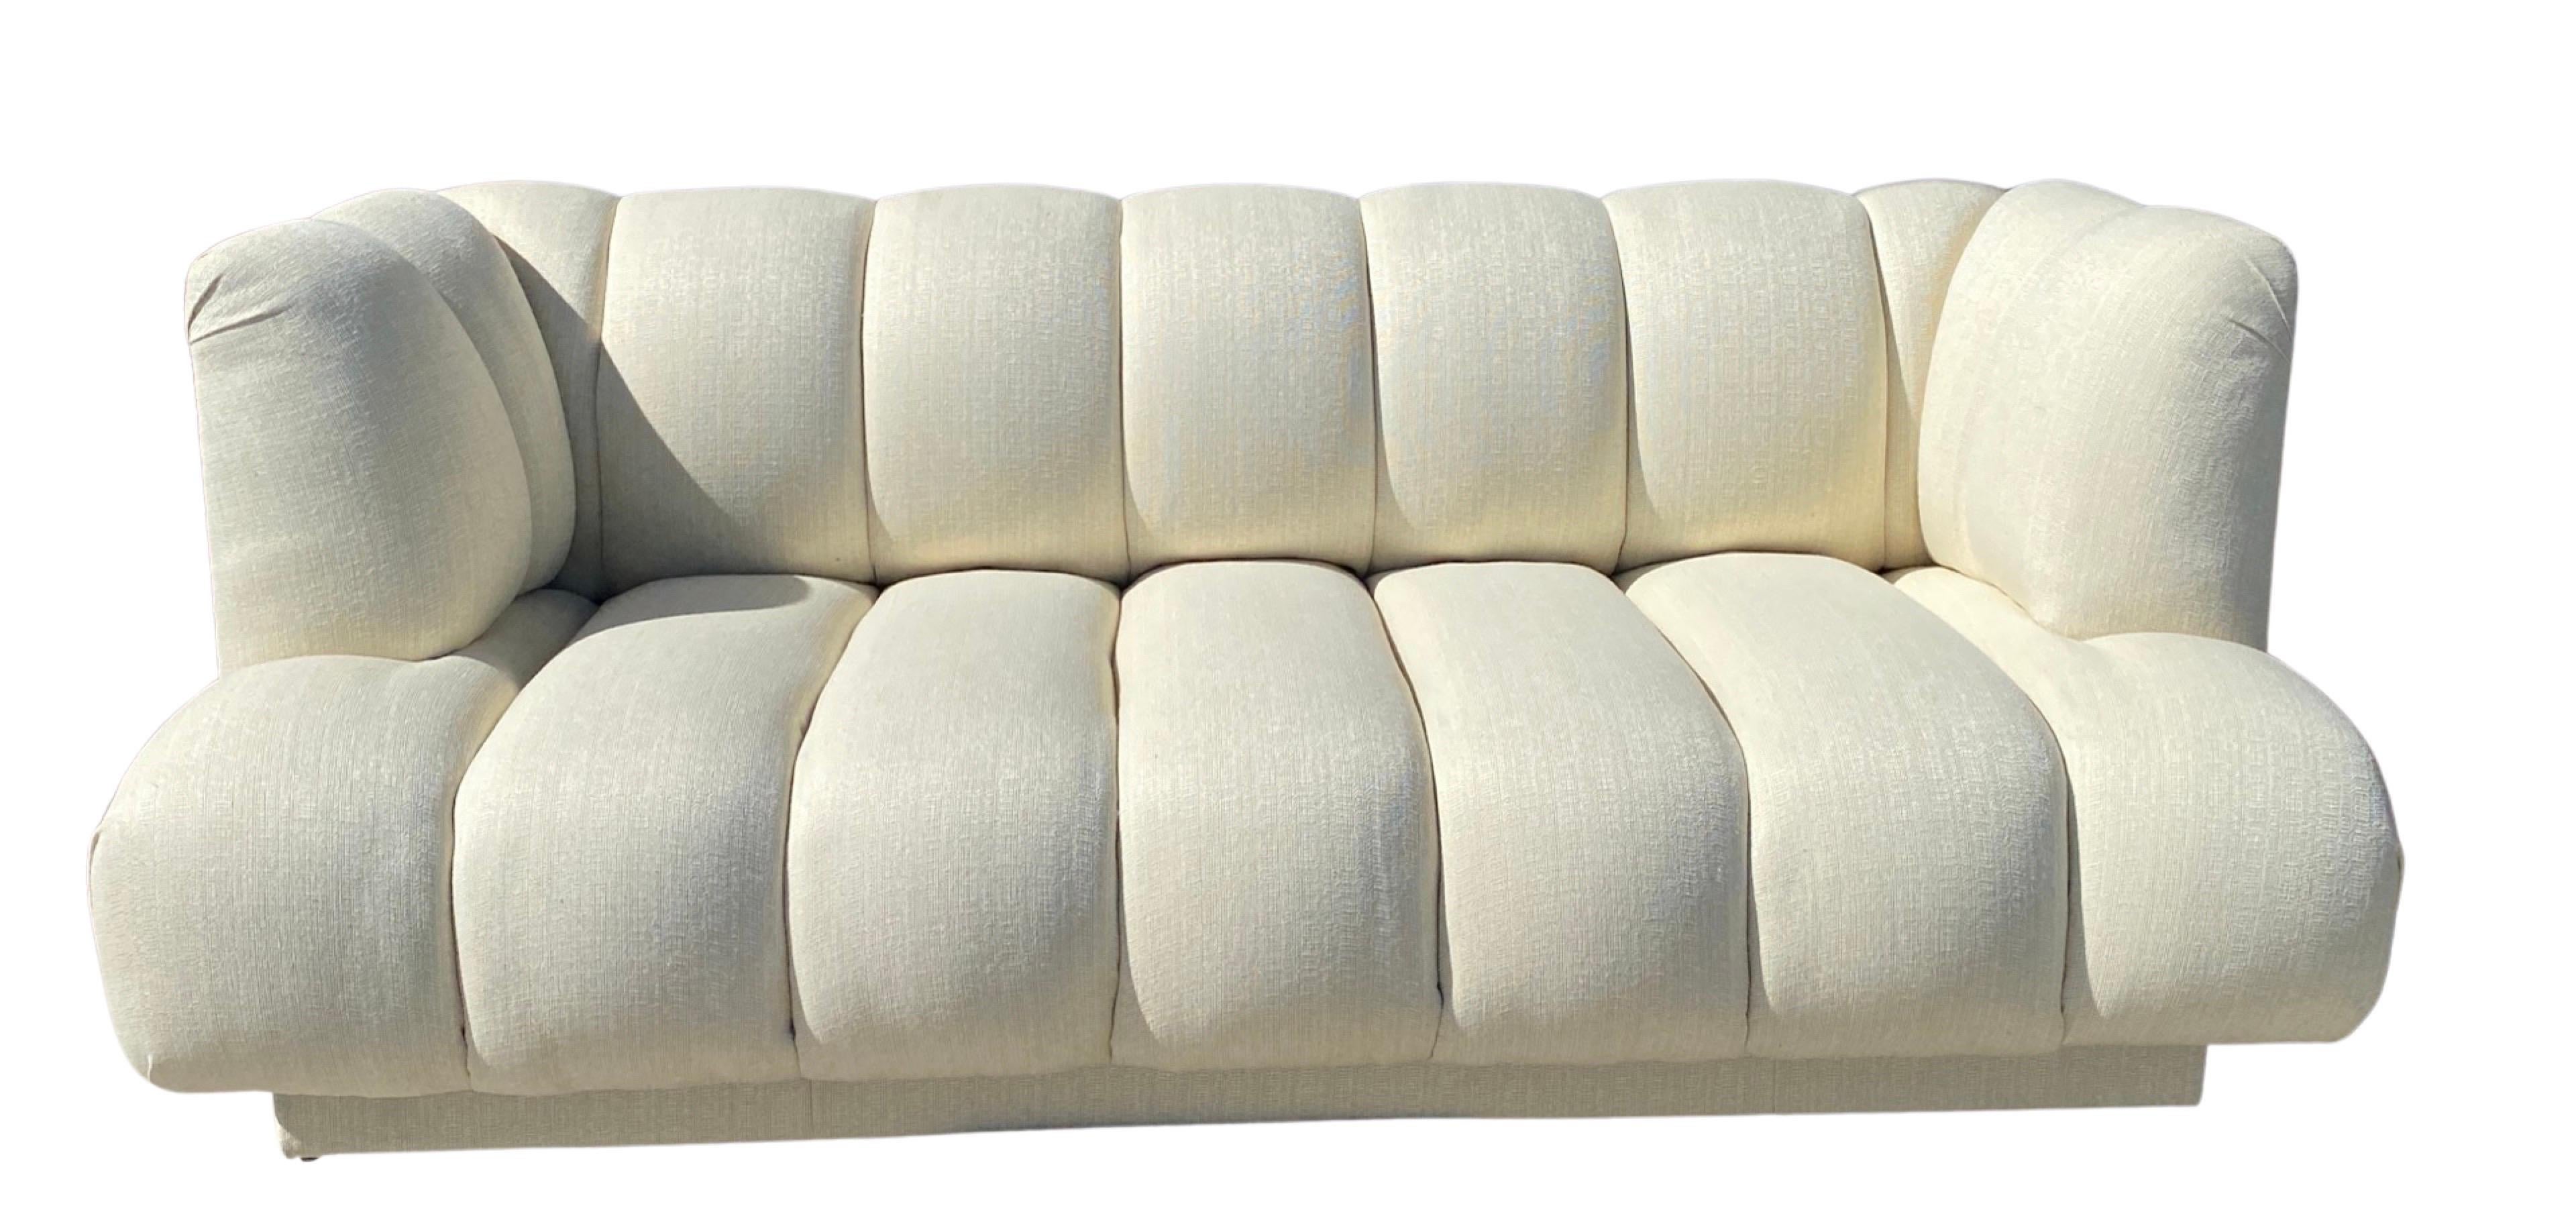 Steve Chase Iconic Channel Sofa From Celebrity Estate in New Creme Upholstery  For Sale 5